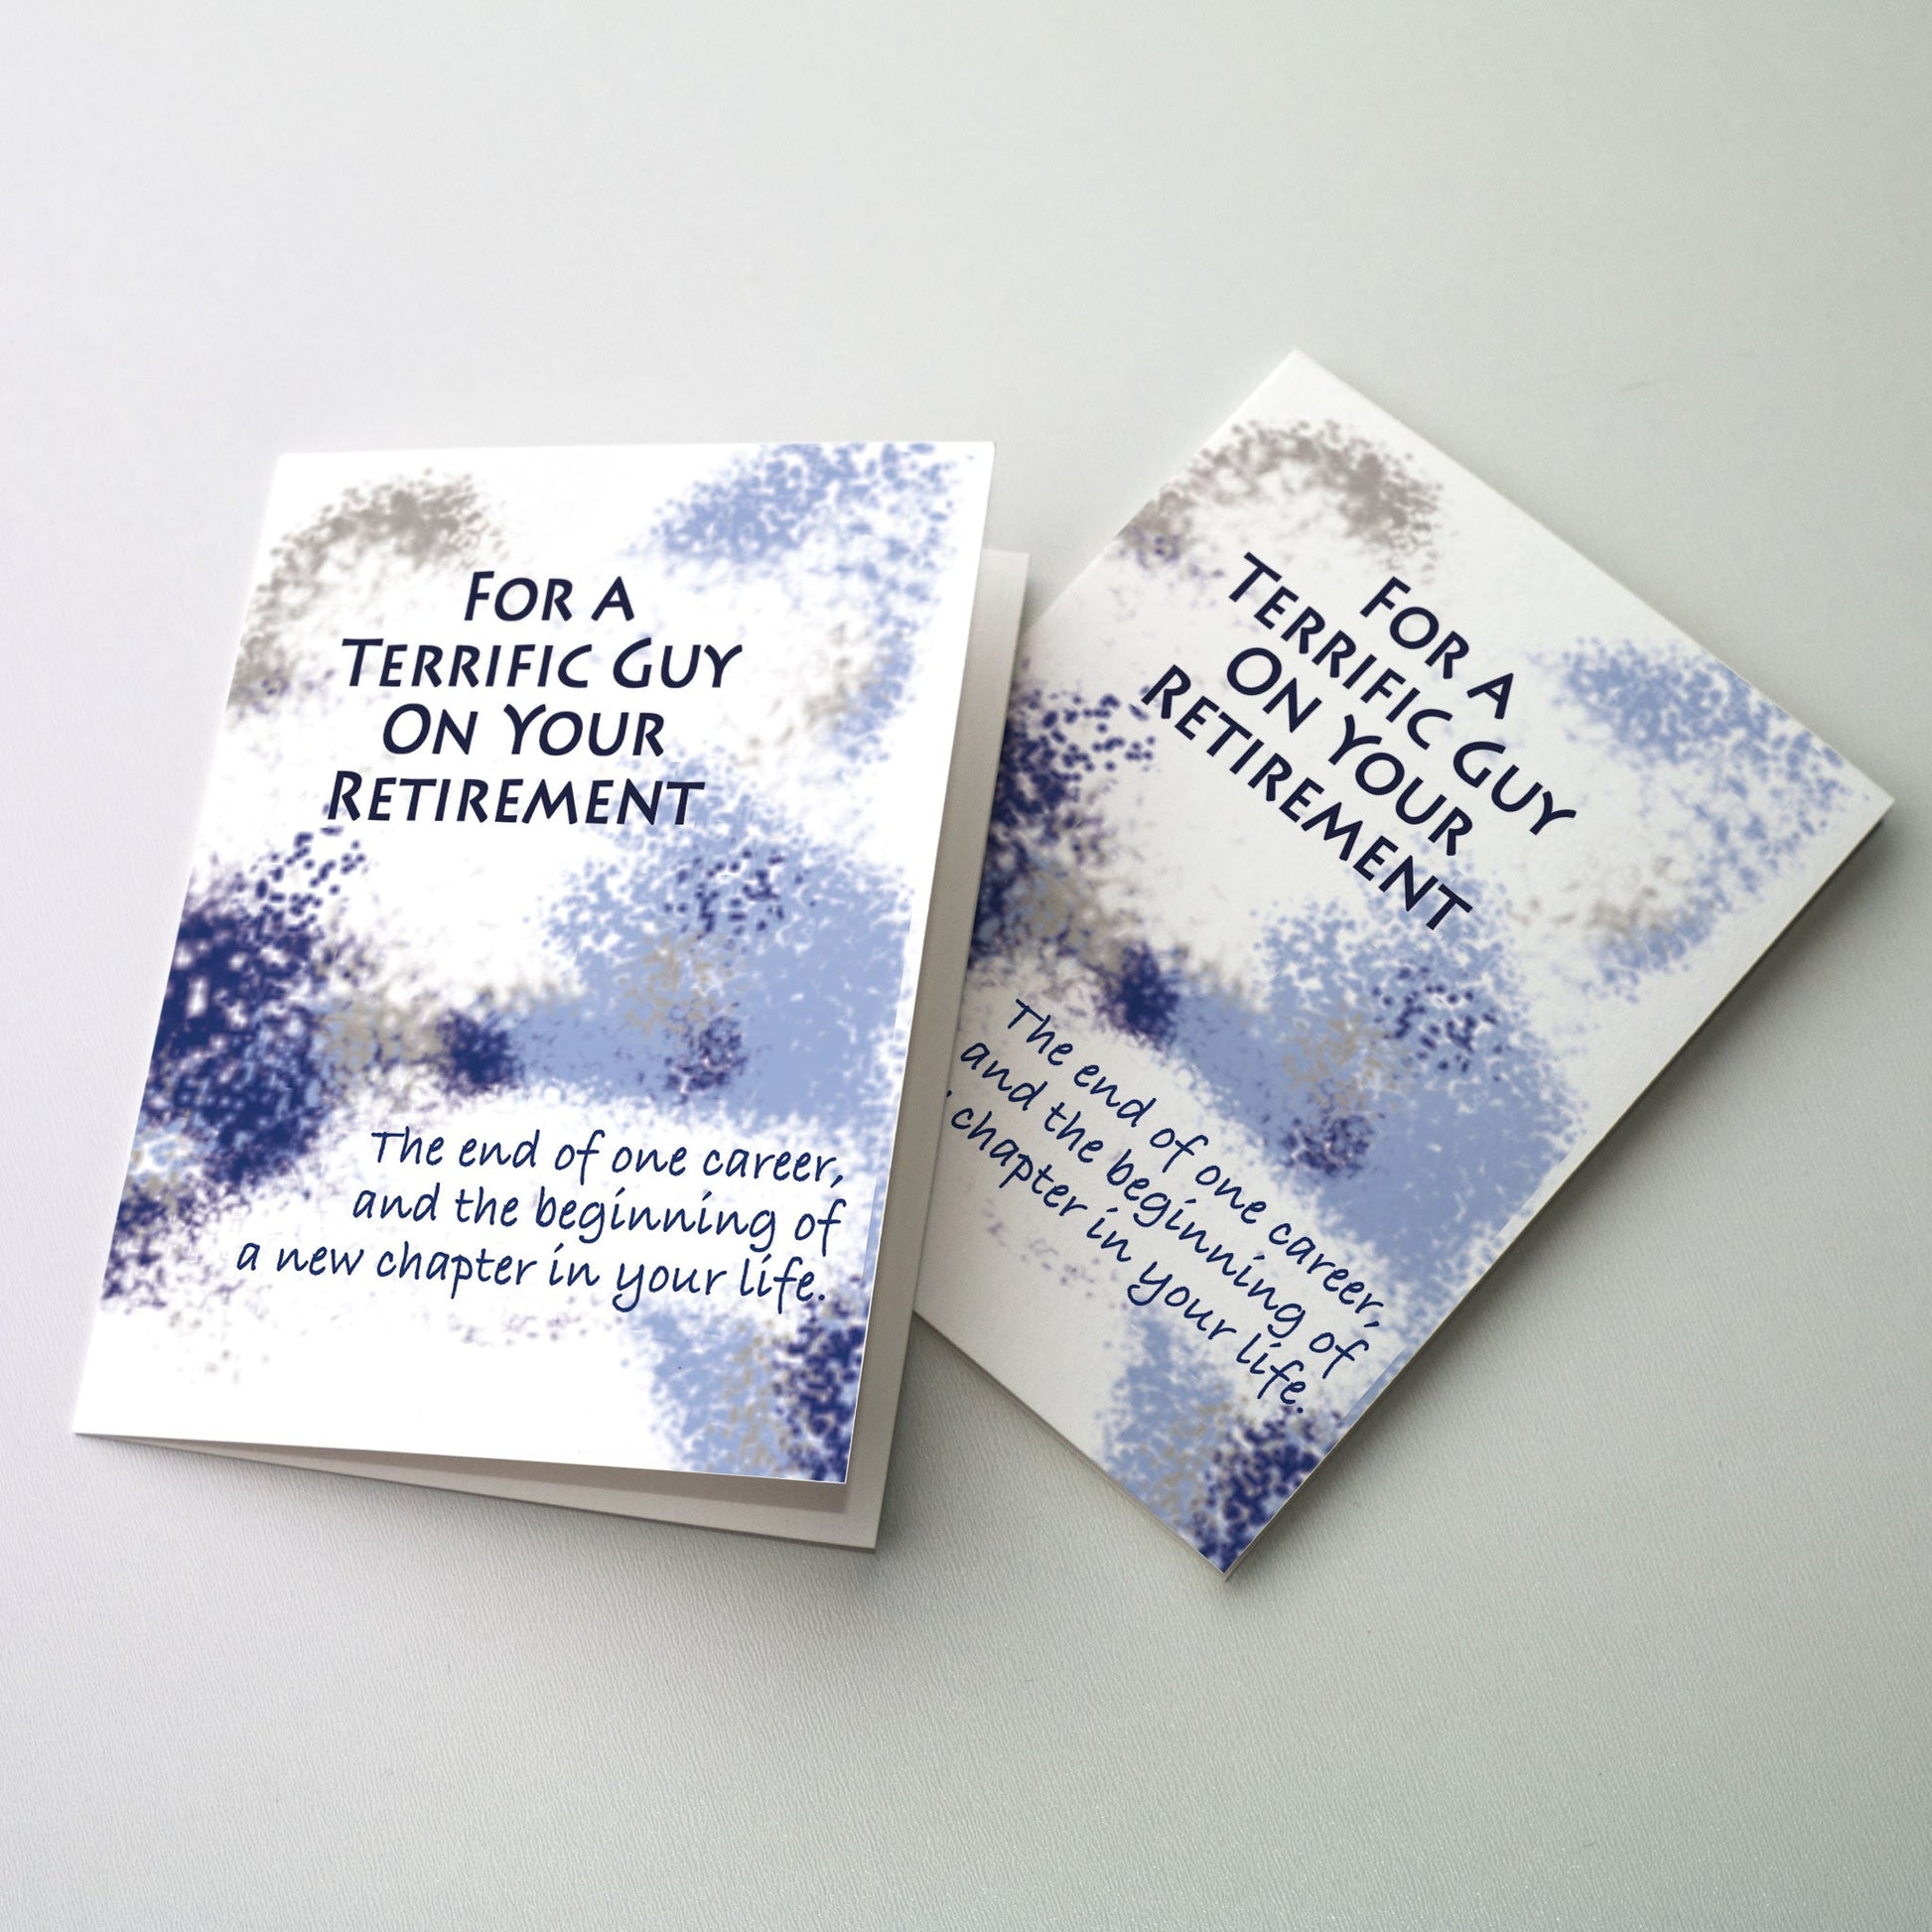 Masculine confetti background in blue and gray with cover lettering.